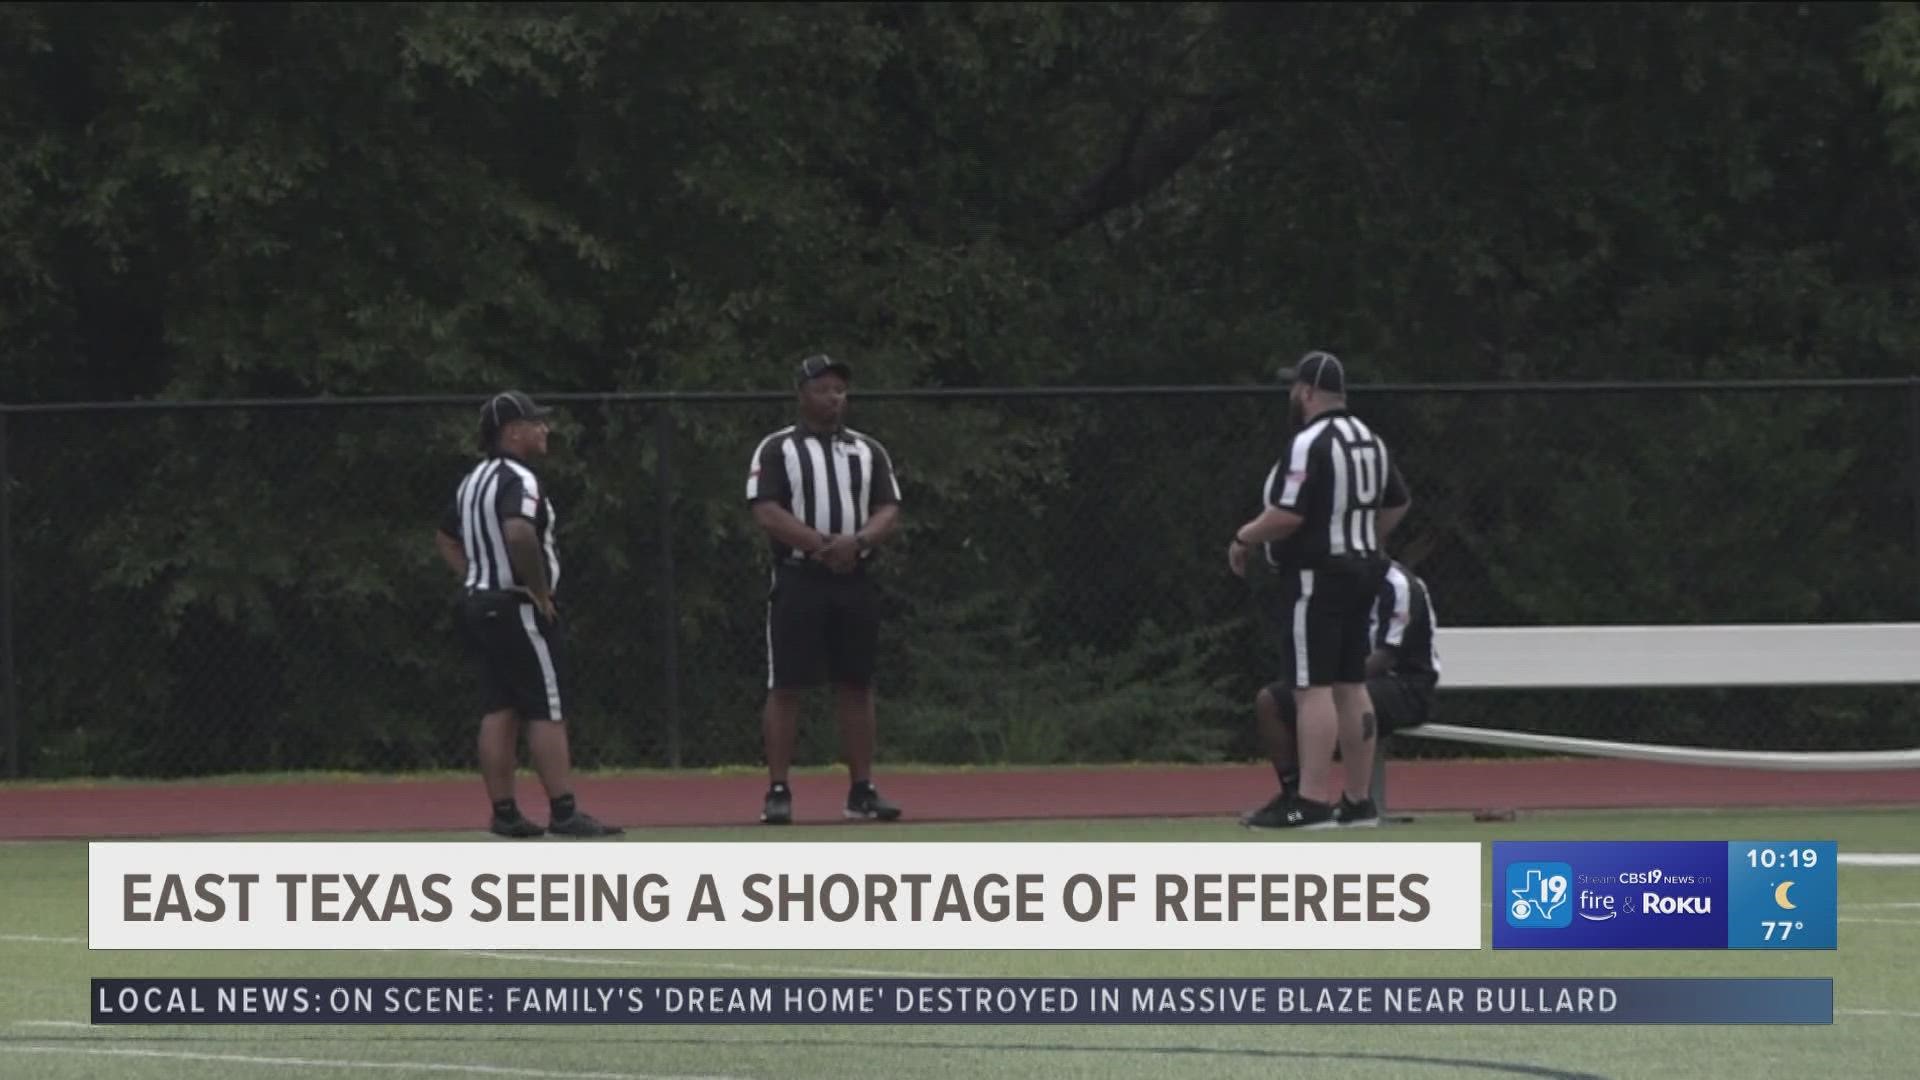 East Texas needs more referees amid shortage